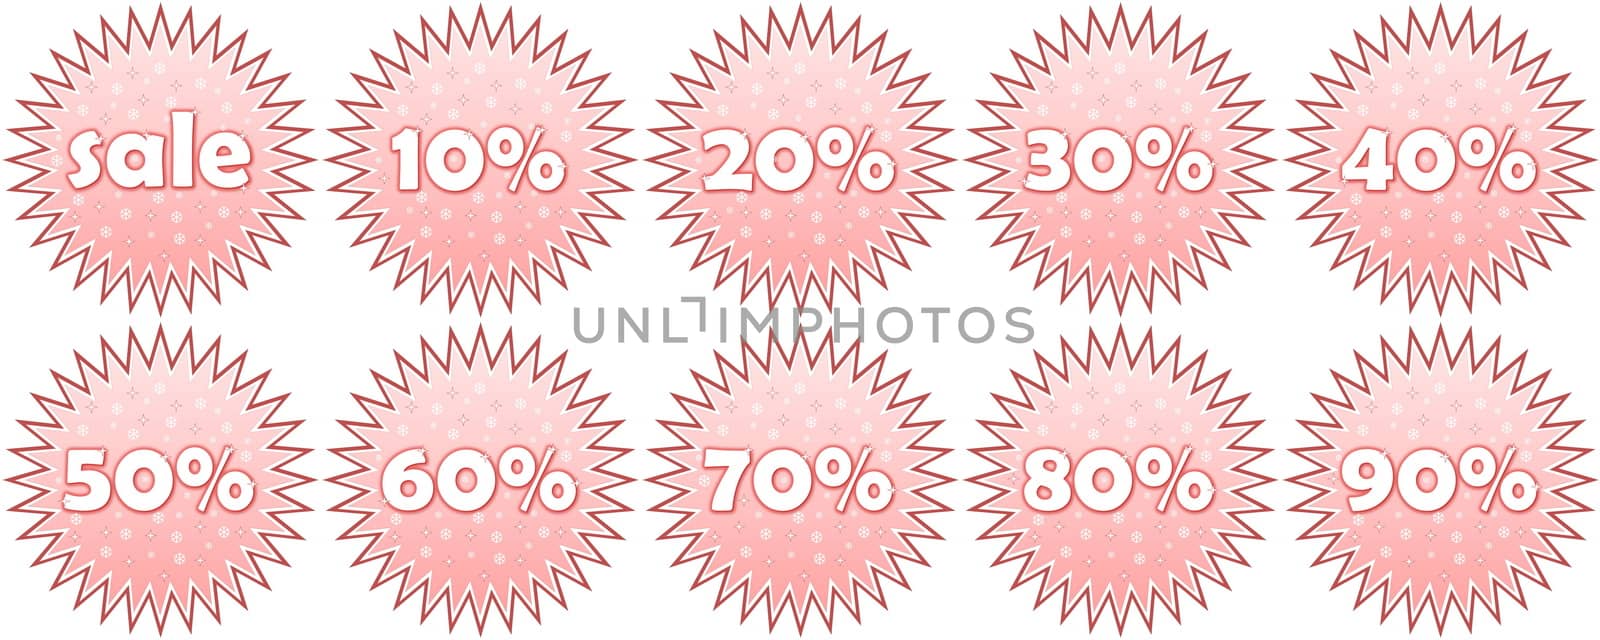 Set of winter sale and percentage discounts icons in white background